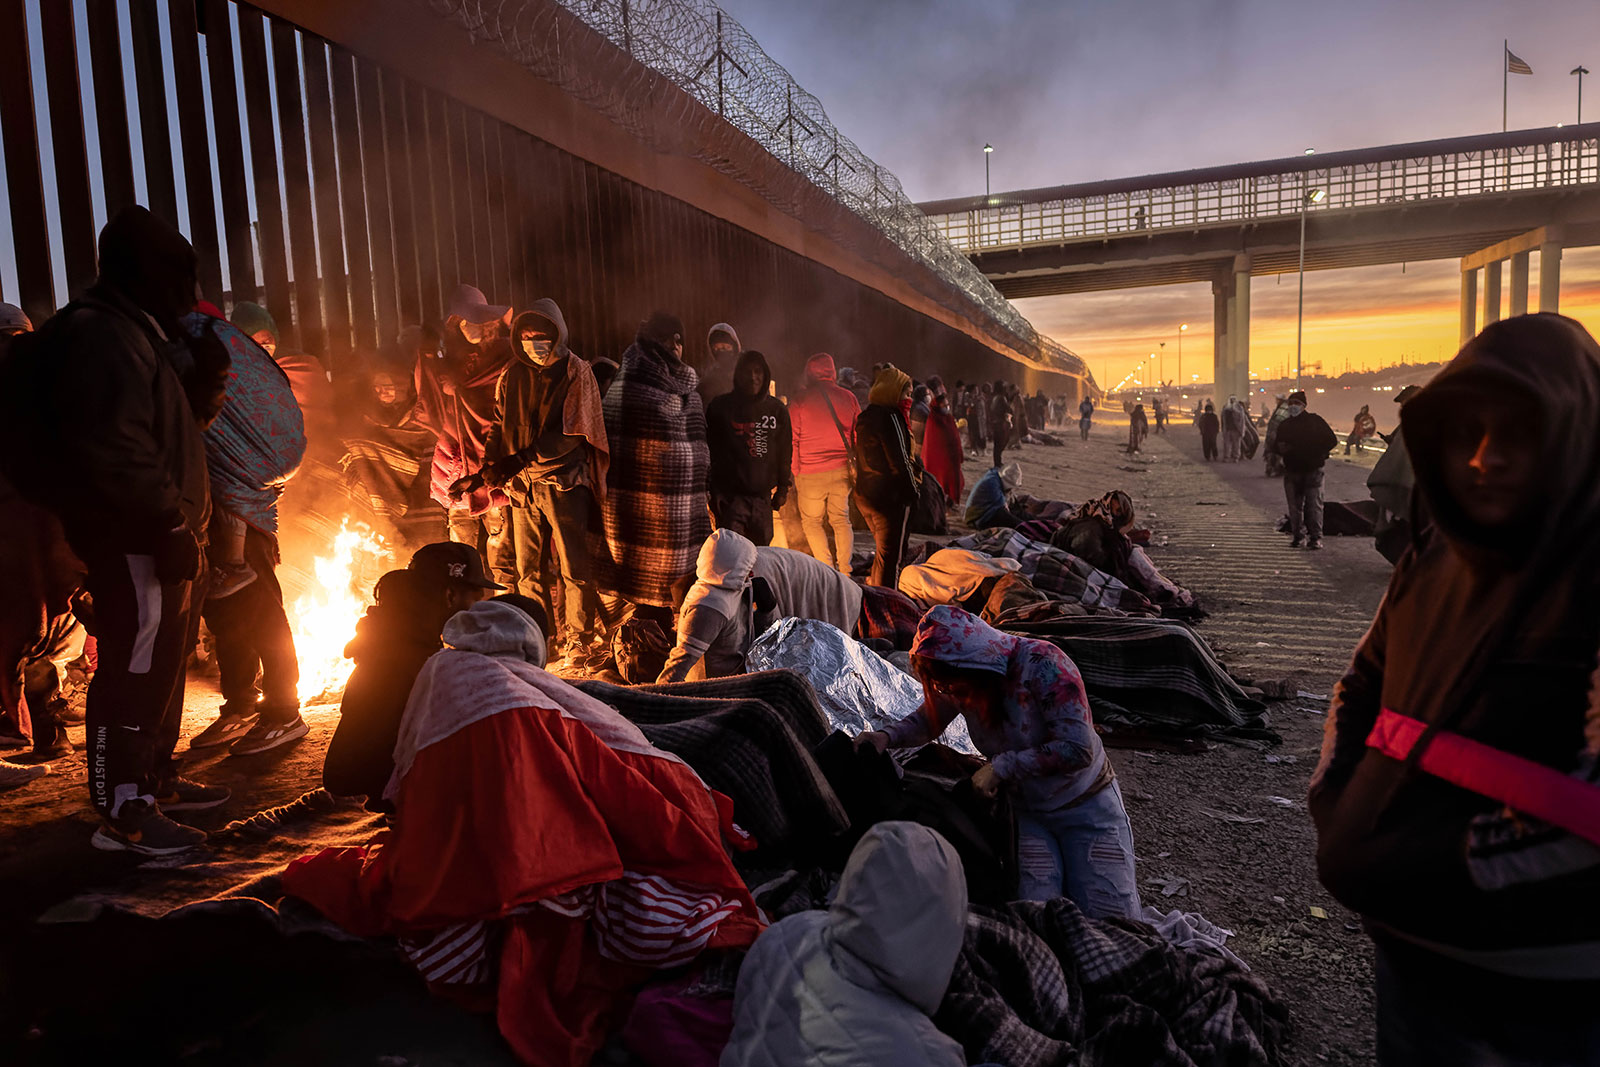 Migrants warm themselves by a fire next to the US-Mexico border fence on December 22 in El Paso, Texas.